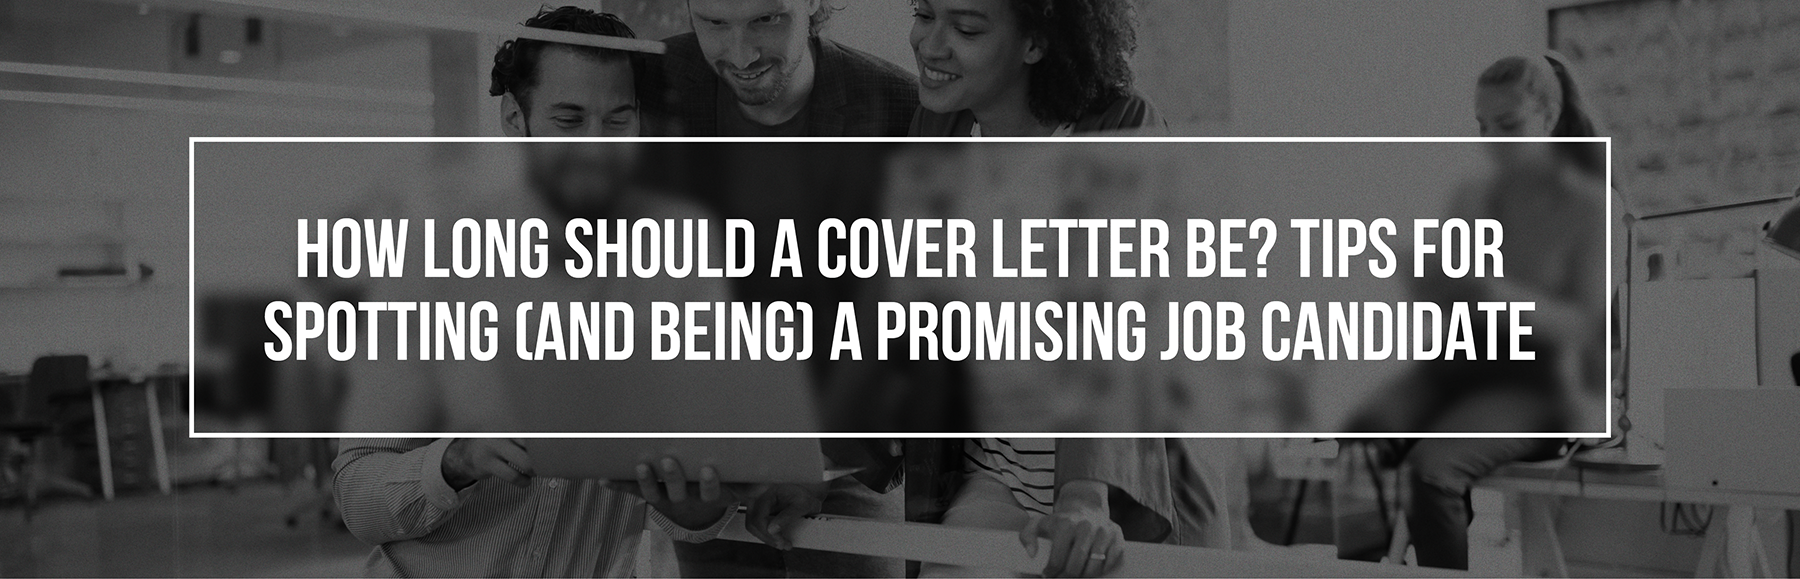 how-long-should-cover-letter